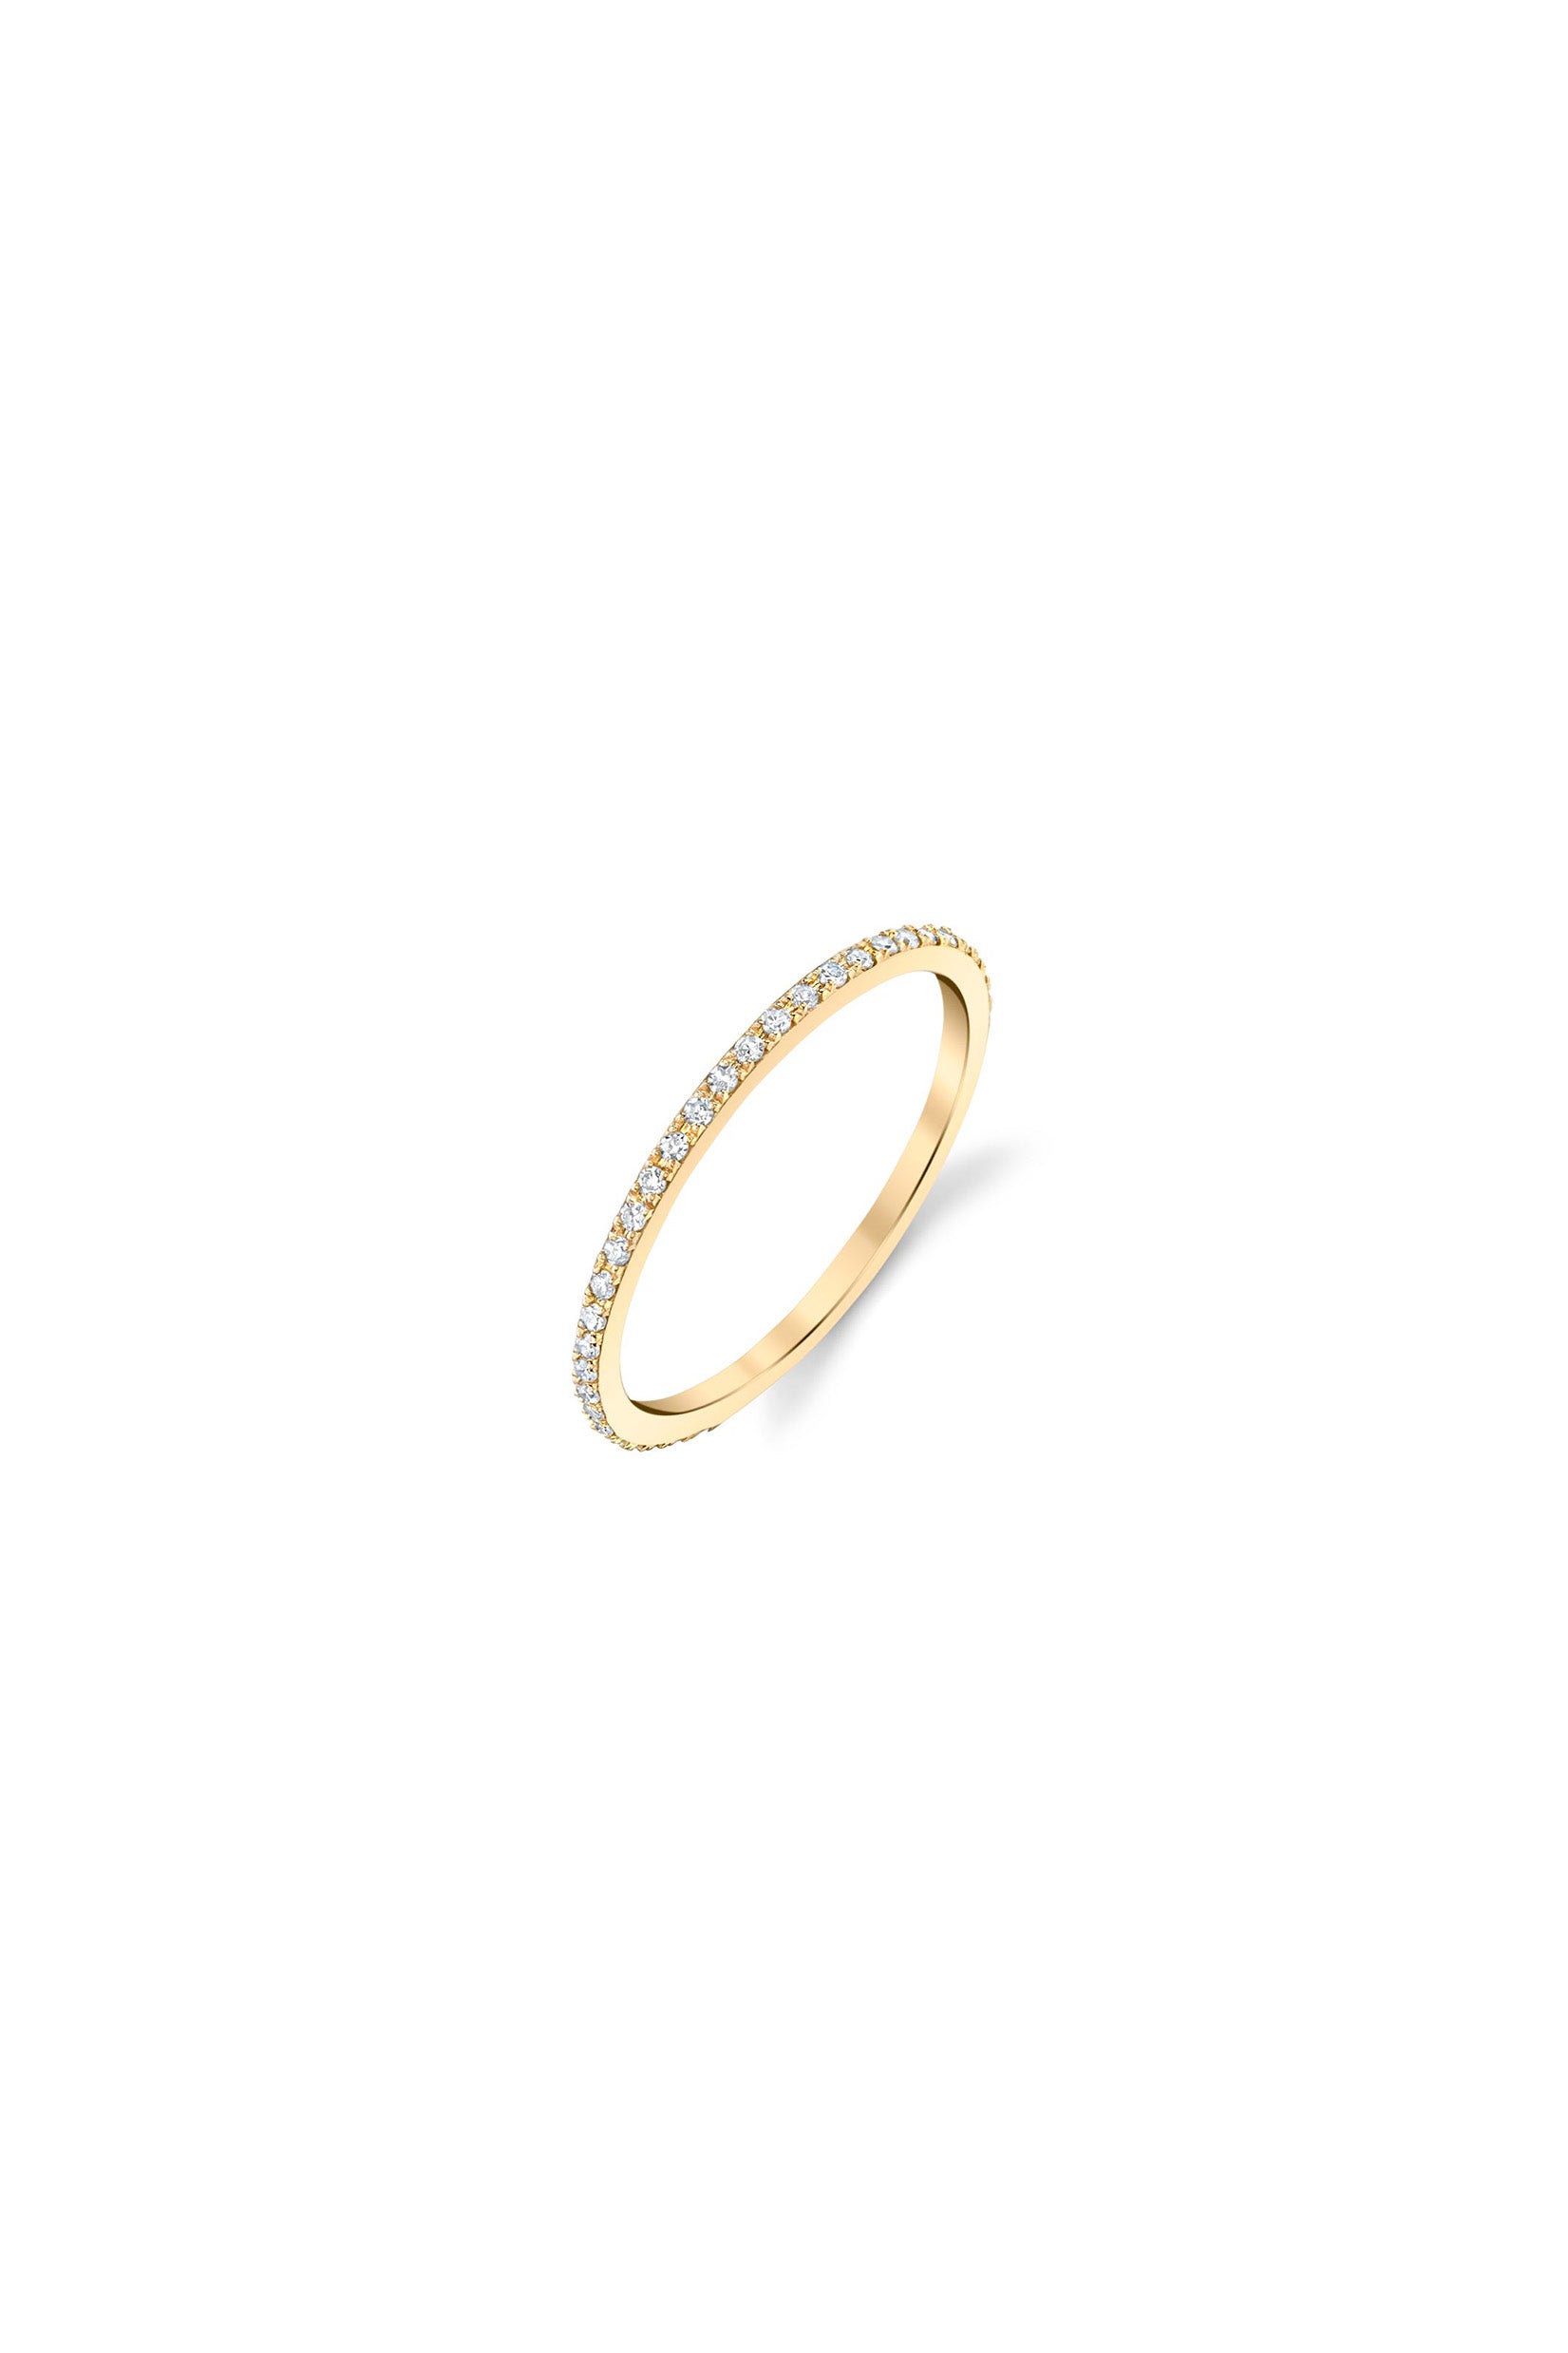 Axis Ring with White Pavé Diamond in 14K Yellow Gold